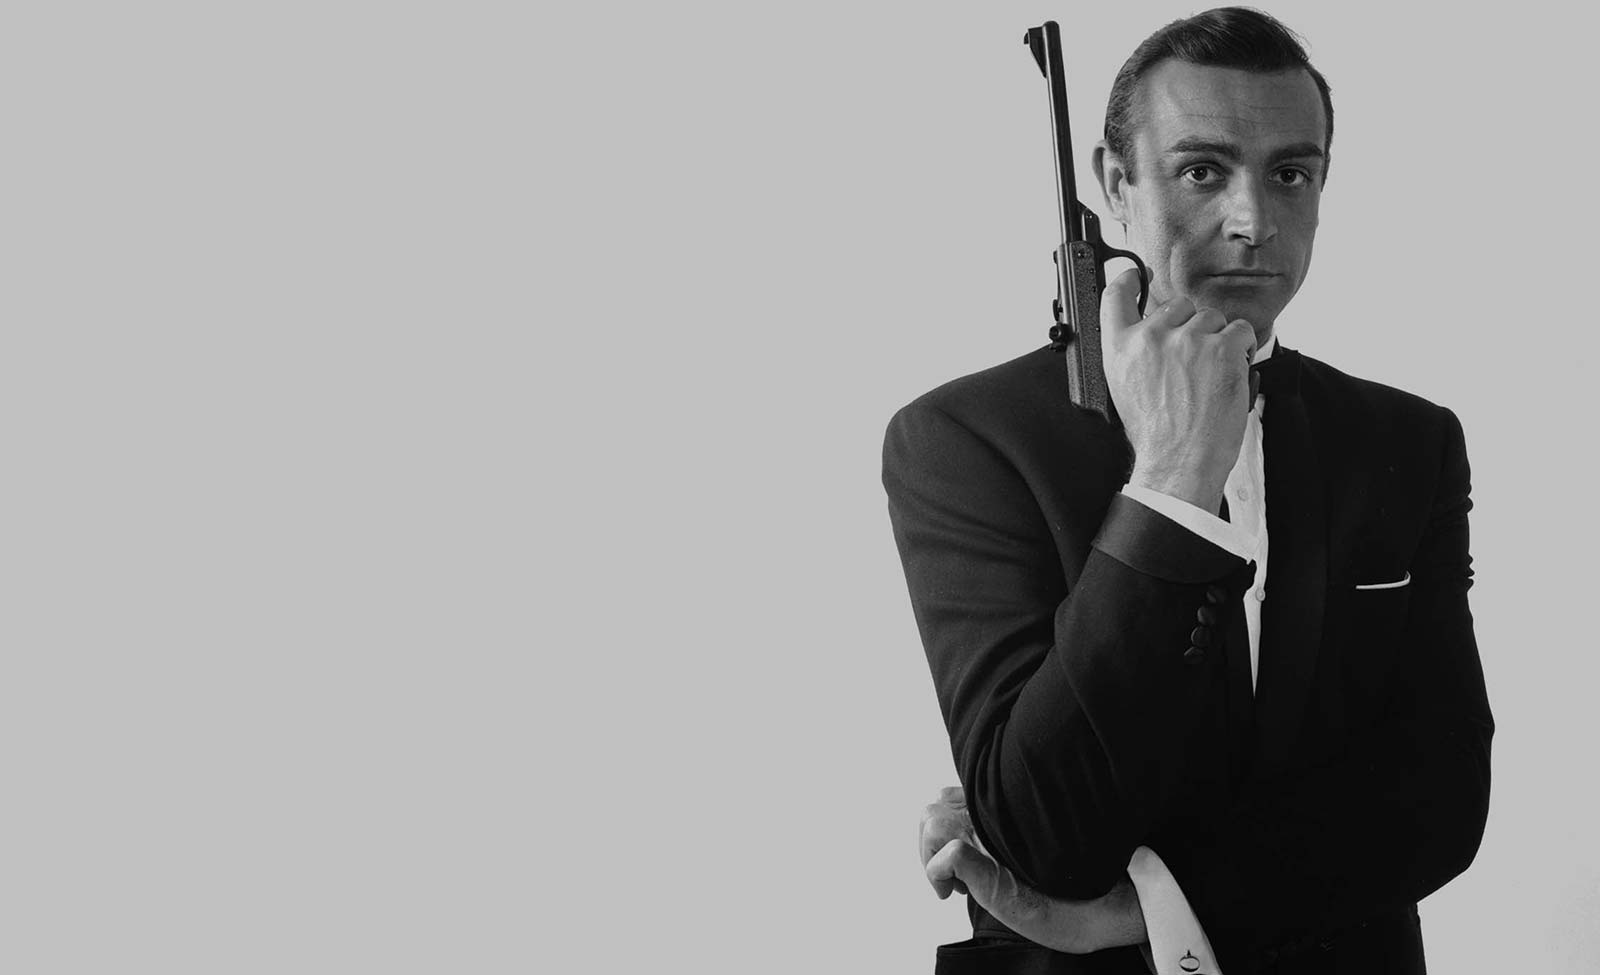 What are James Bond suits?